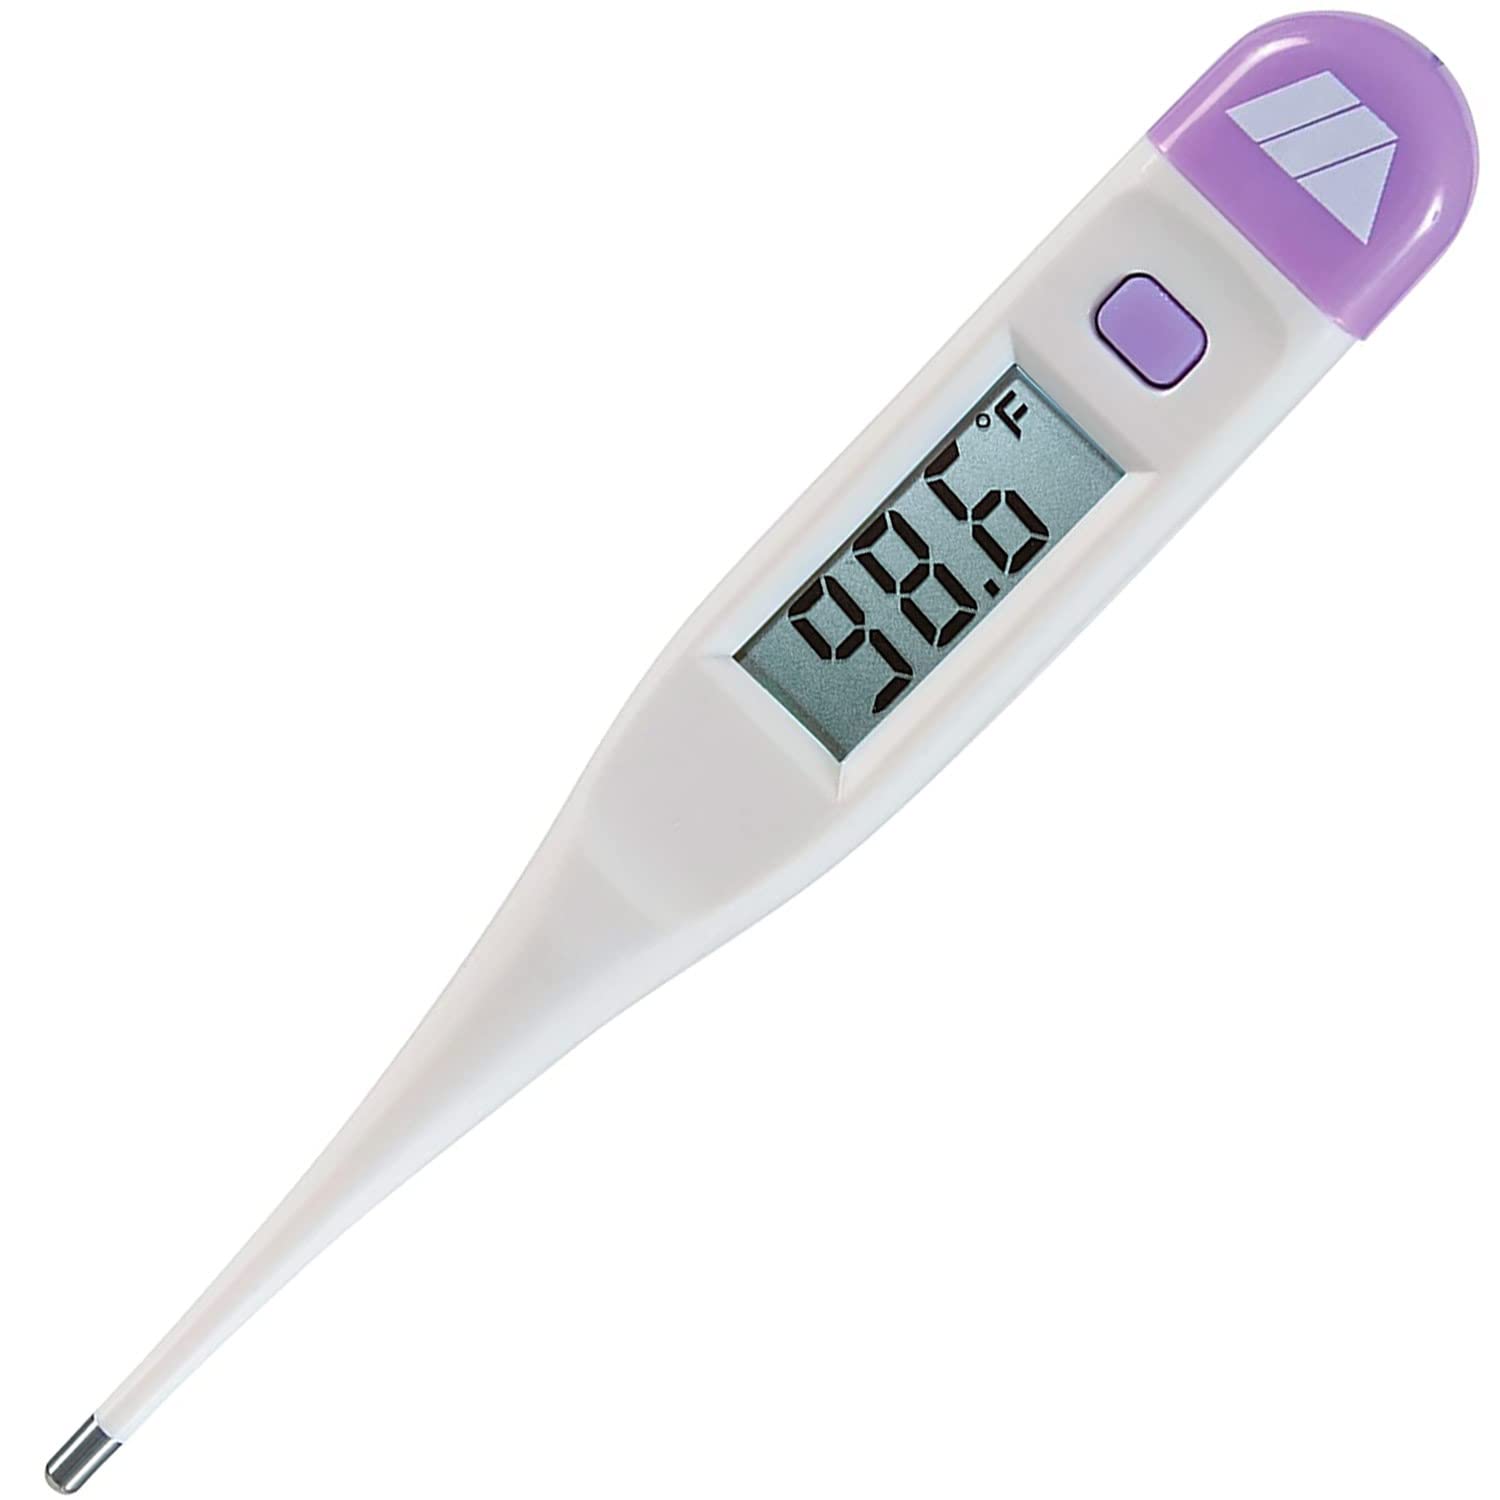 MABIS Digital Thermometer for Babies, Children and Adults for Oral, Rectal  or Underarm Use Clinically Accurate Within 60 Seconds, Purple